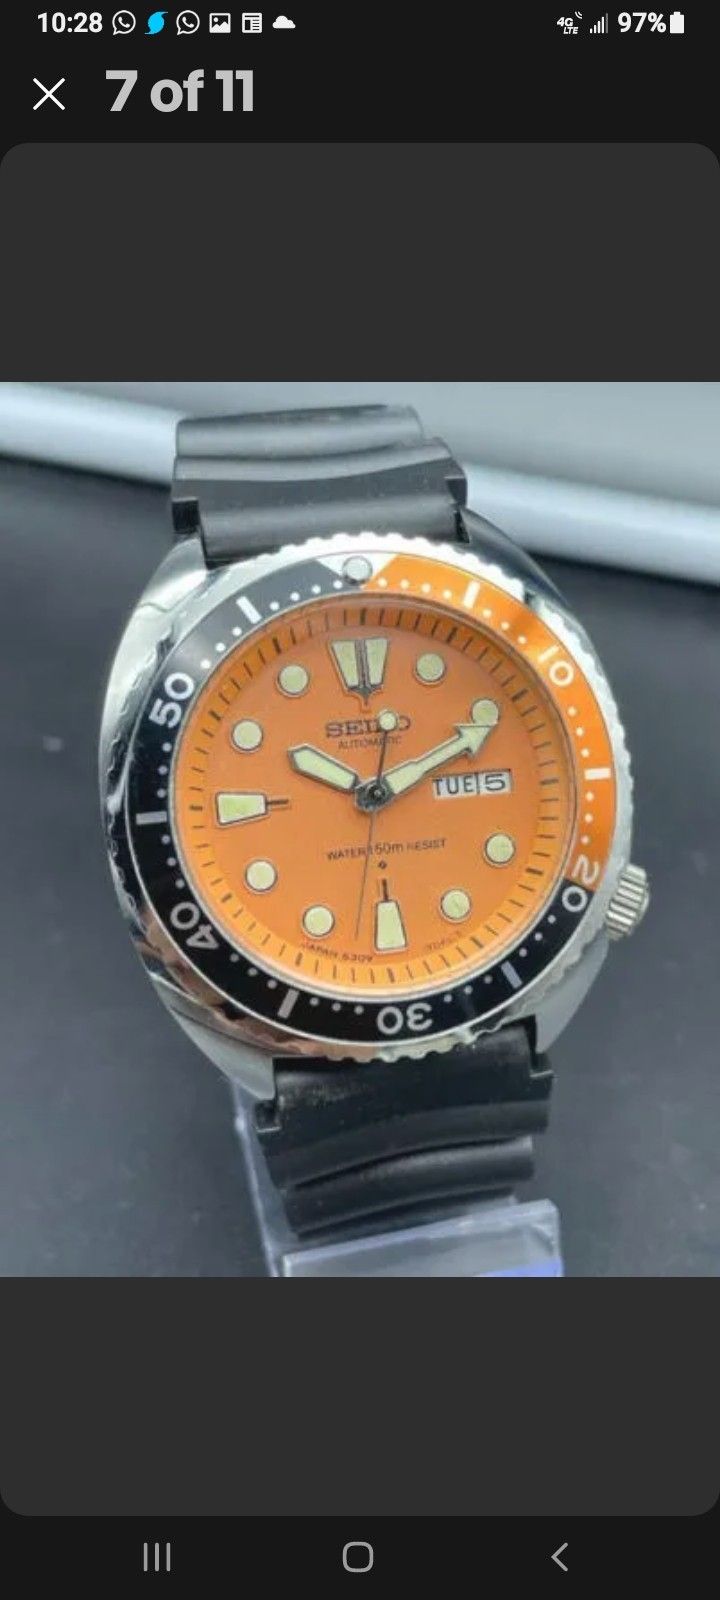 Seiko Diver Watch, Completly Refurbished Its SKOO7